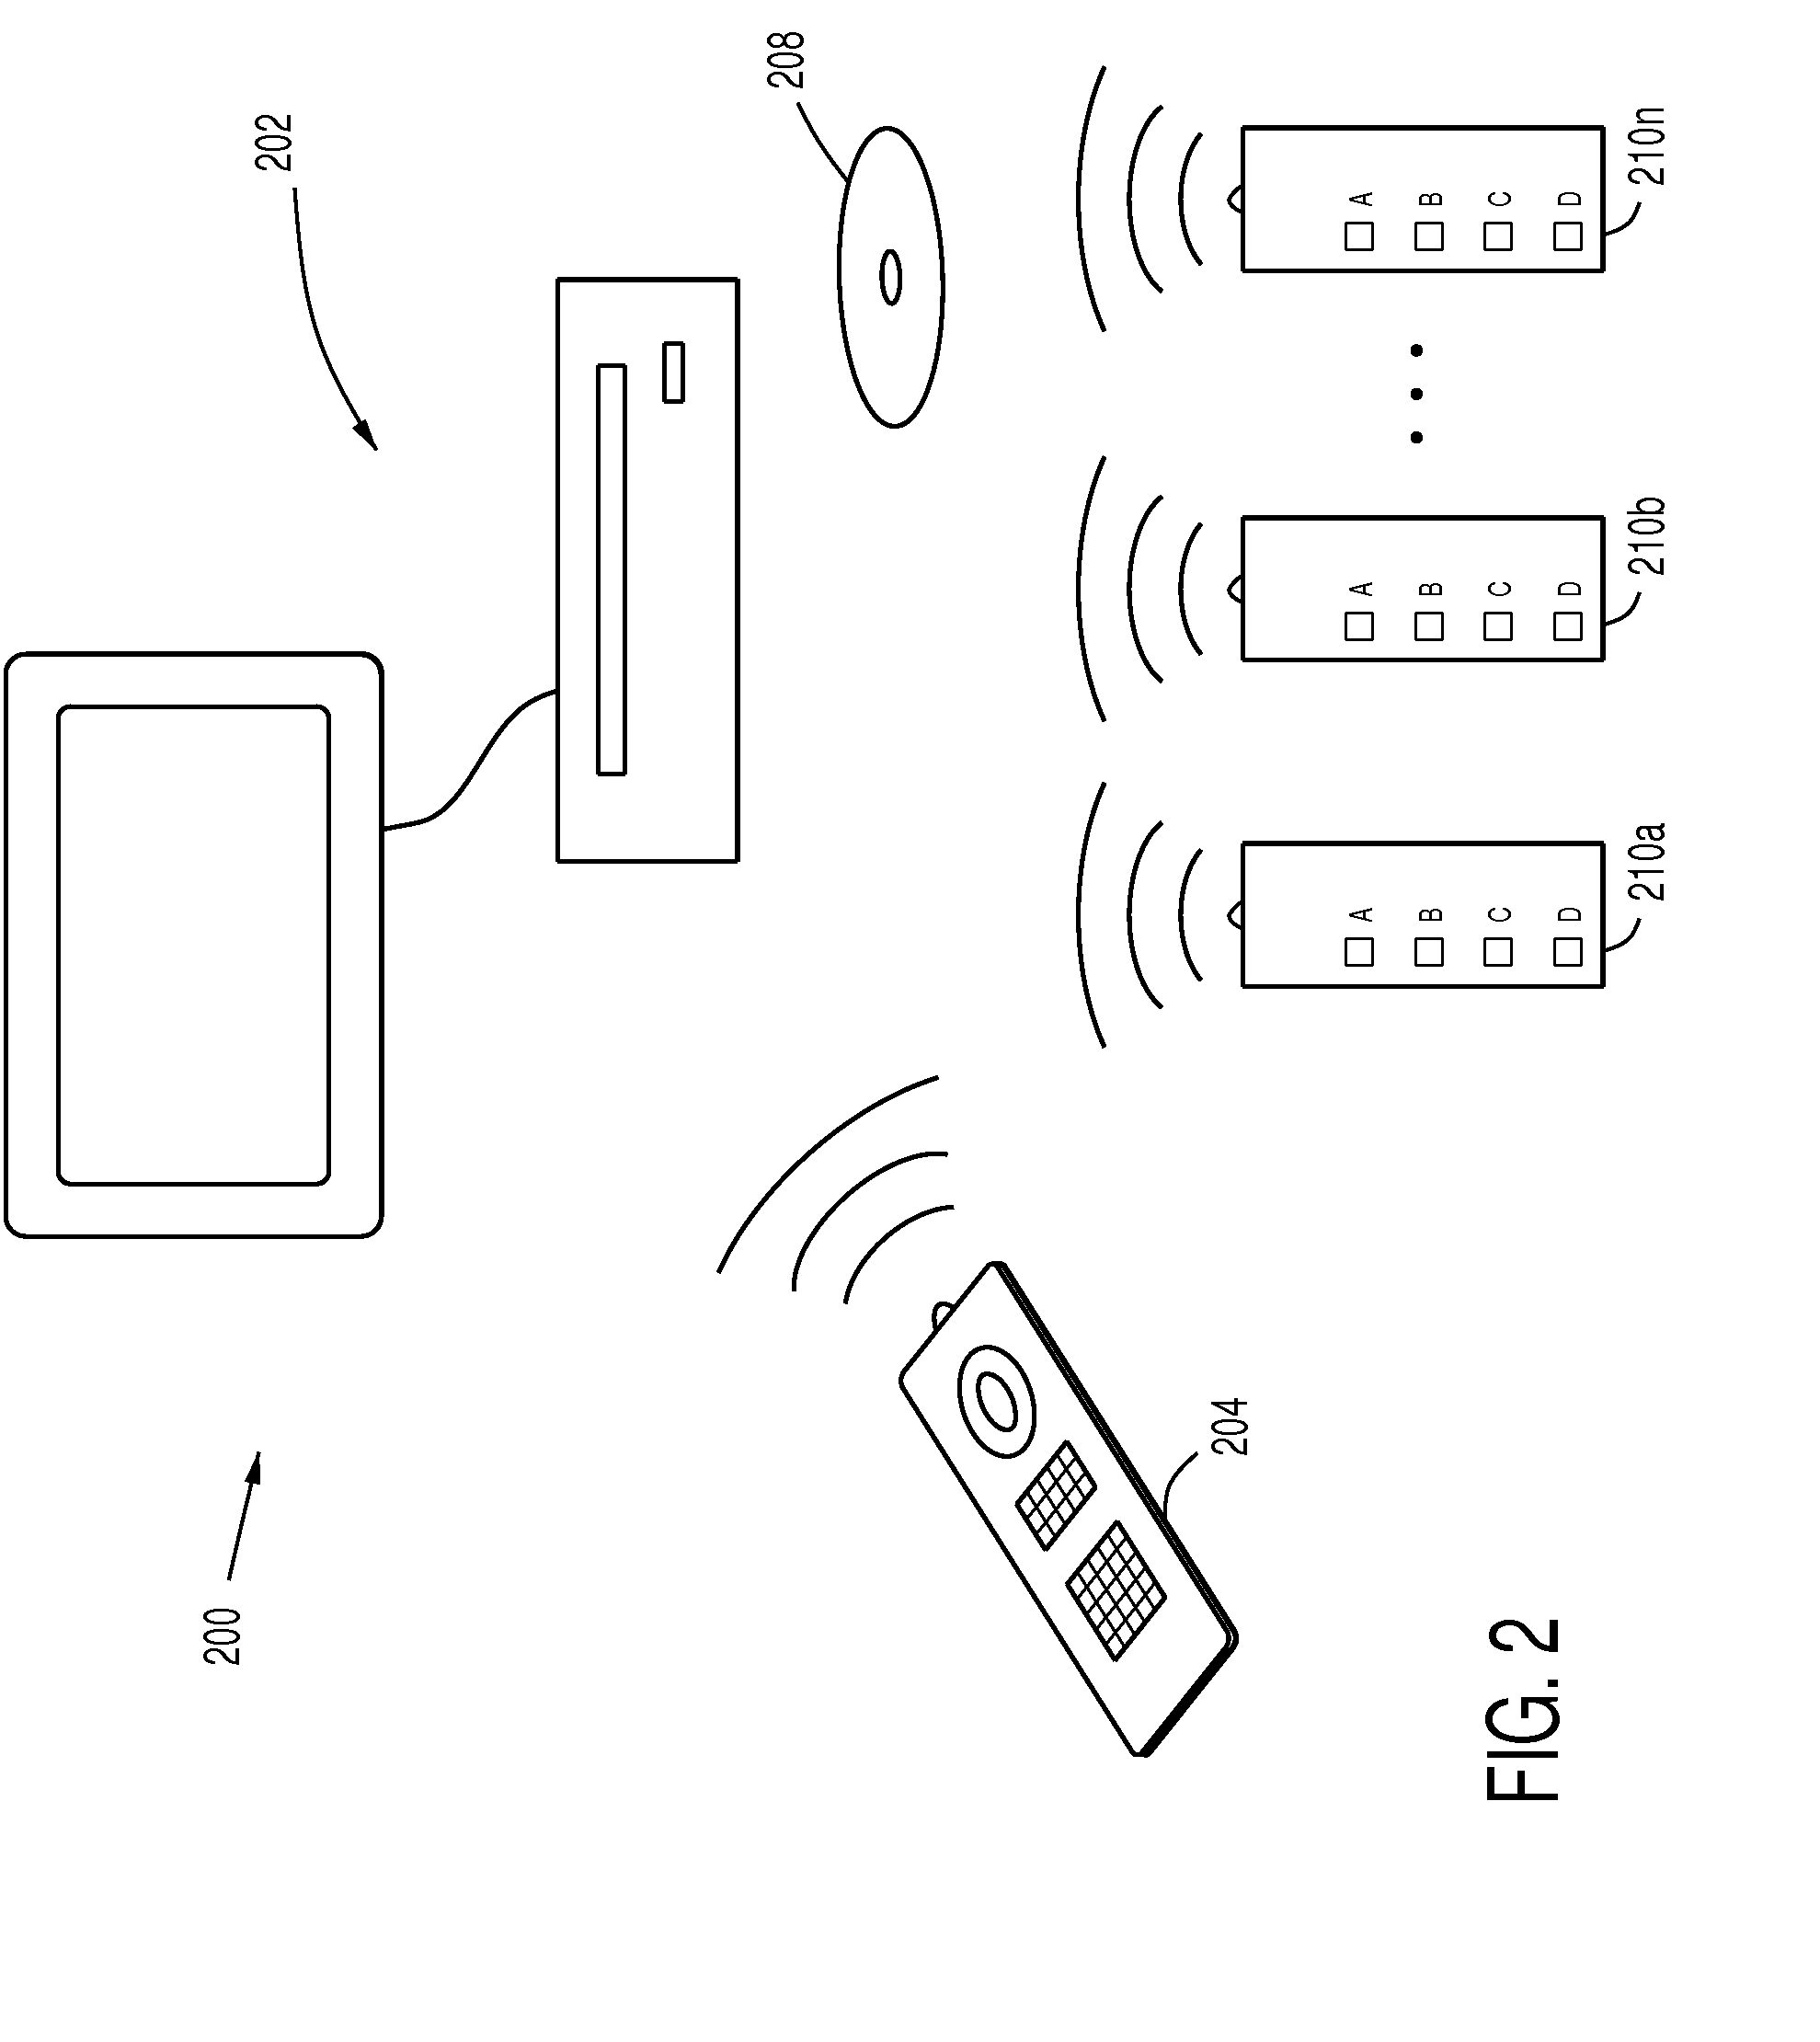 Ethnic awareness education game system and method